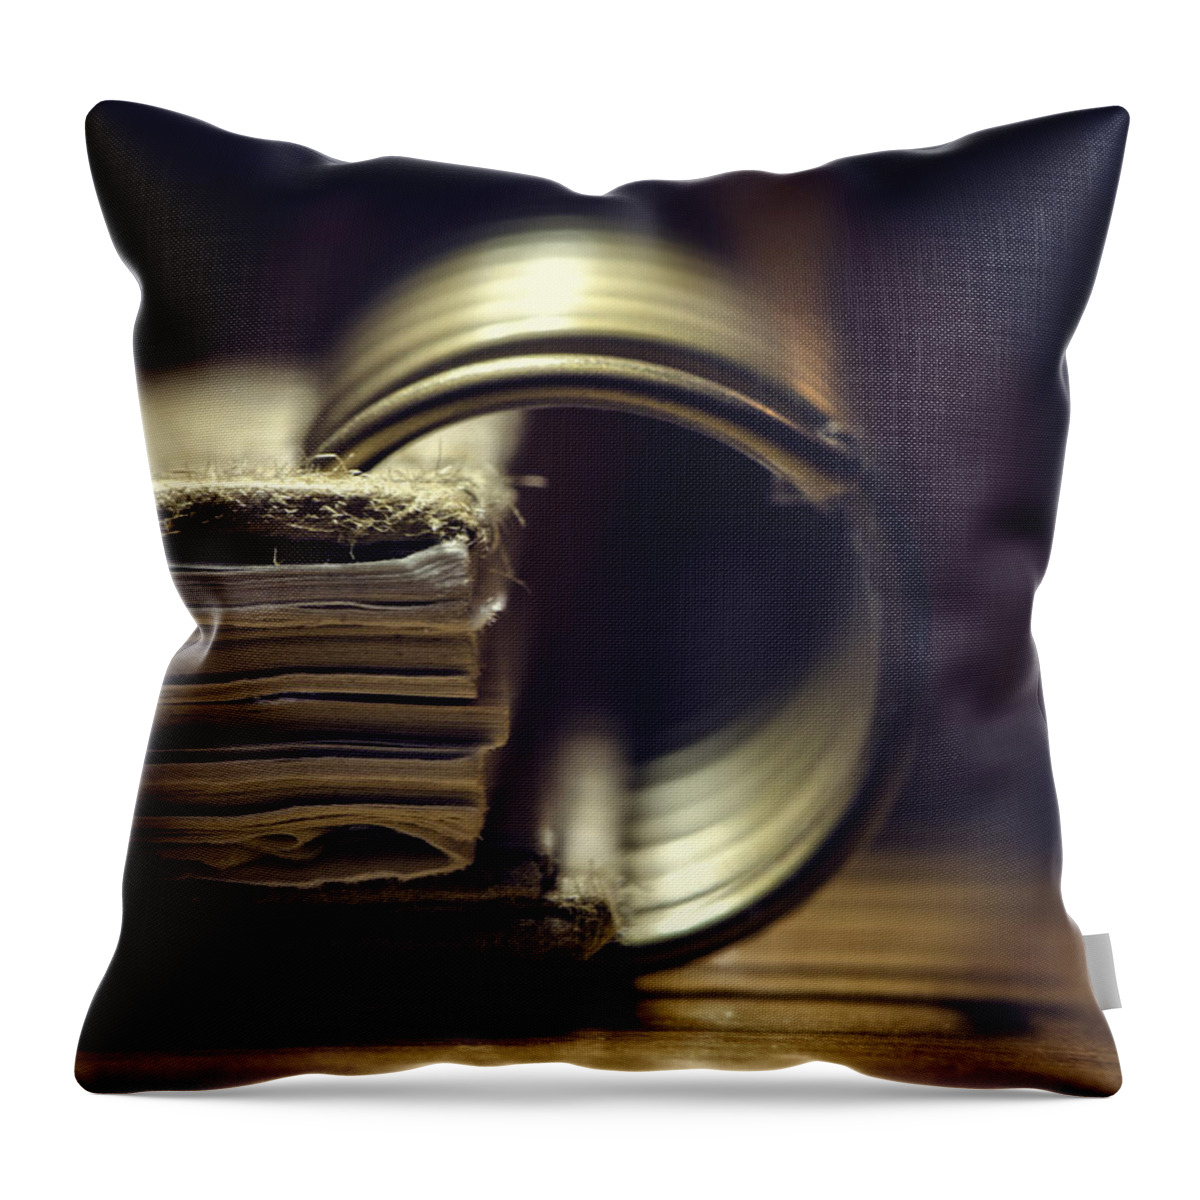 Dof Throw Pillow featuring the photograph Book Of Secrets by Sandra Parlow